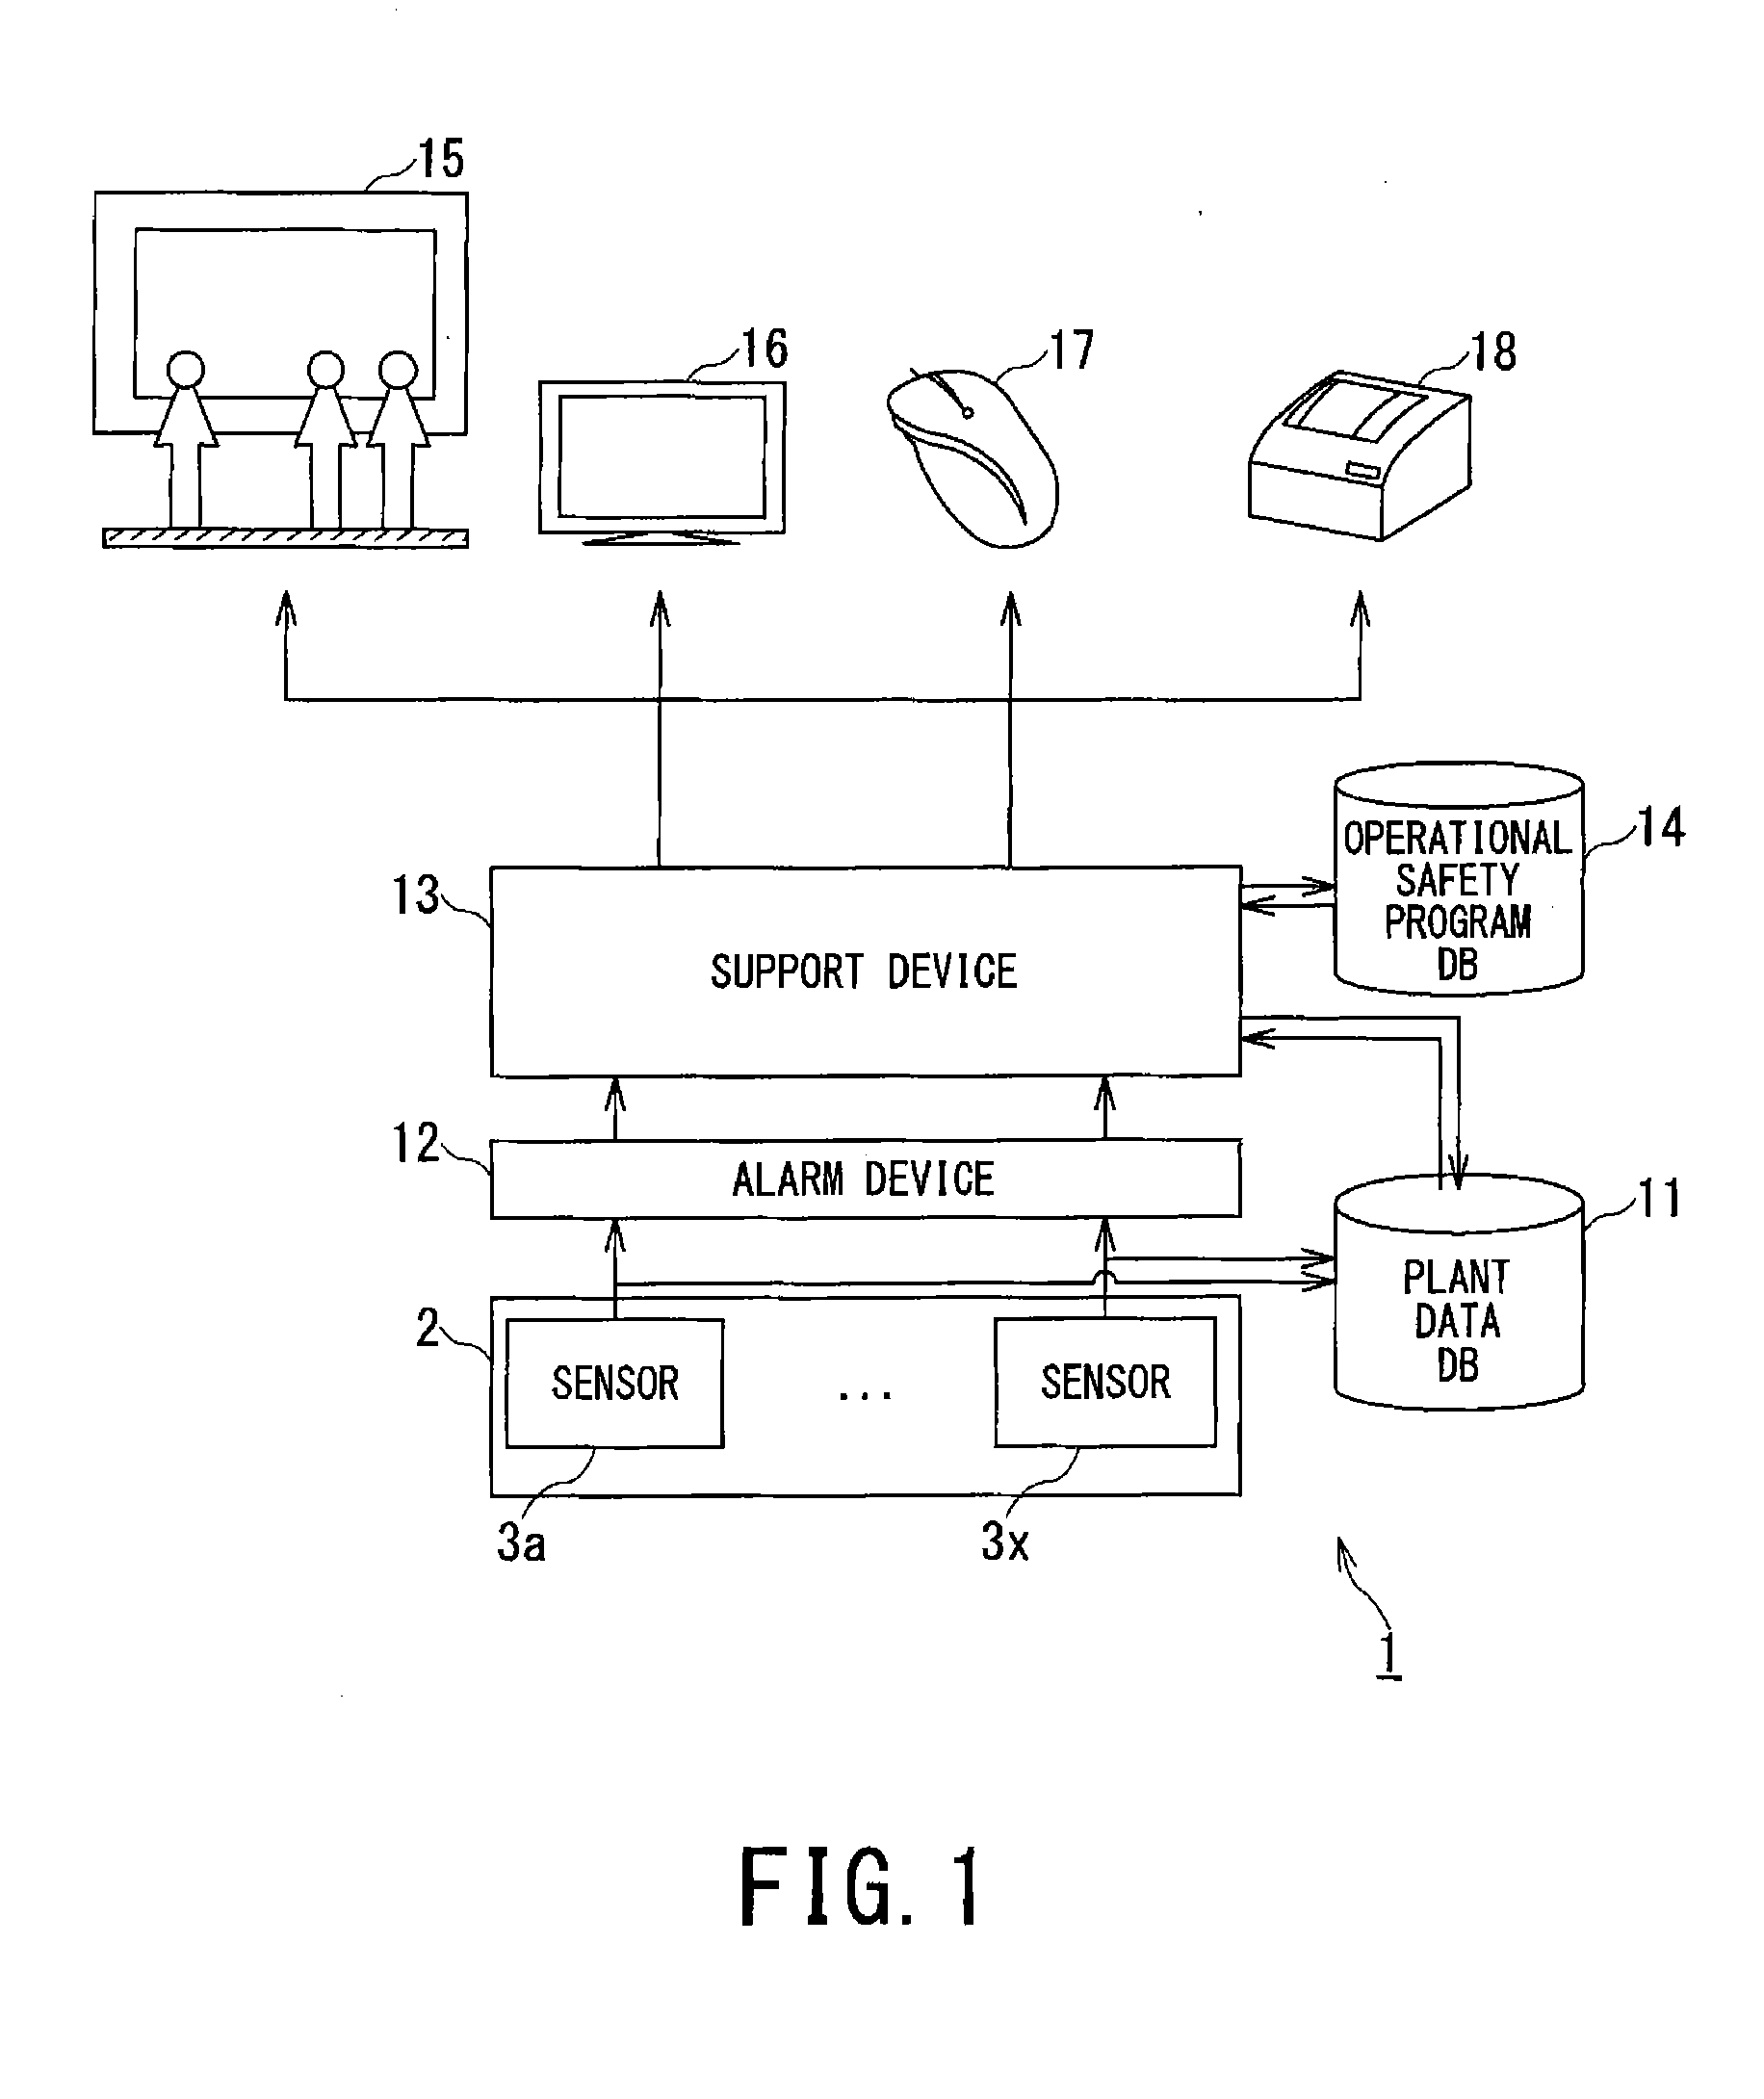 Operation management support apparatus for power plant